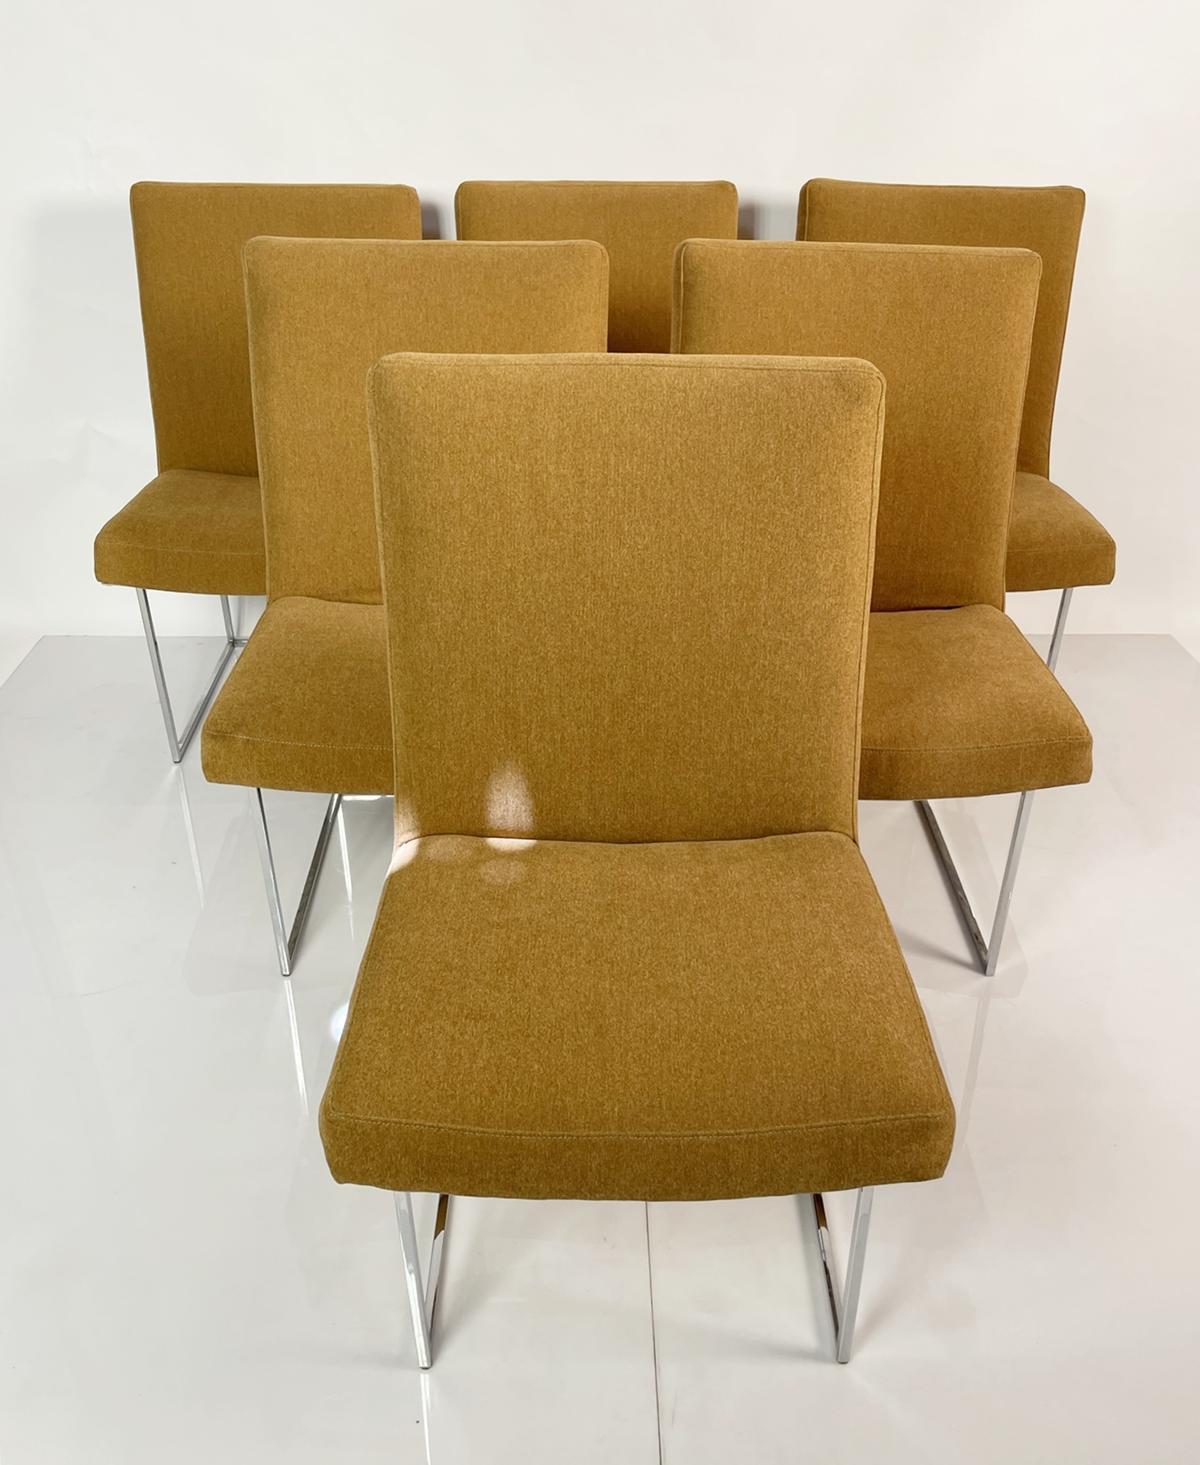 Introducing the Set of Six Dining Chairs by Milo Baughman for Thayer Coggin - a stunning collection of chairs that bring elegance and style to your dining space. Designed by renowned designer Milo Baughman and manufactured in the 1970's by Thayer